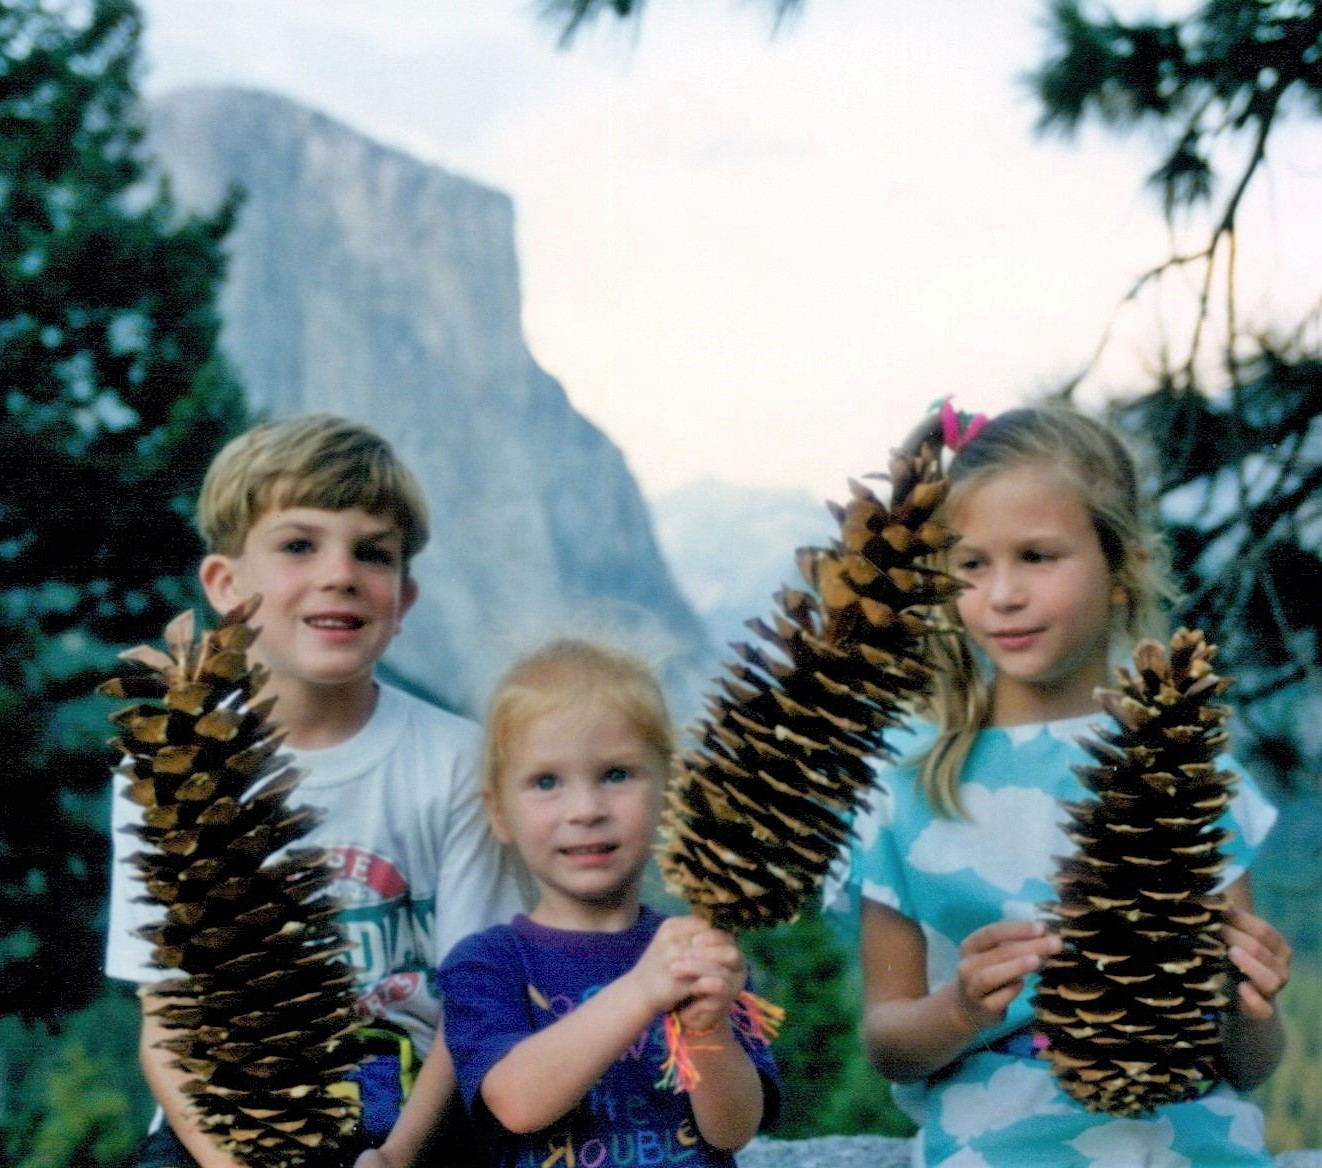 Co-author Shannon Gapp, age 3 (middle), and siblings - discovering Yosemite National Park's treasures.